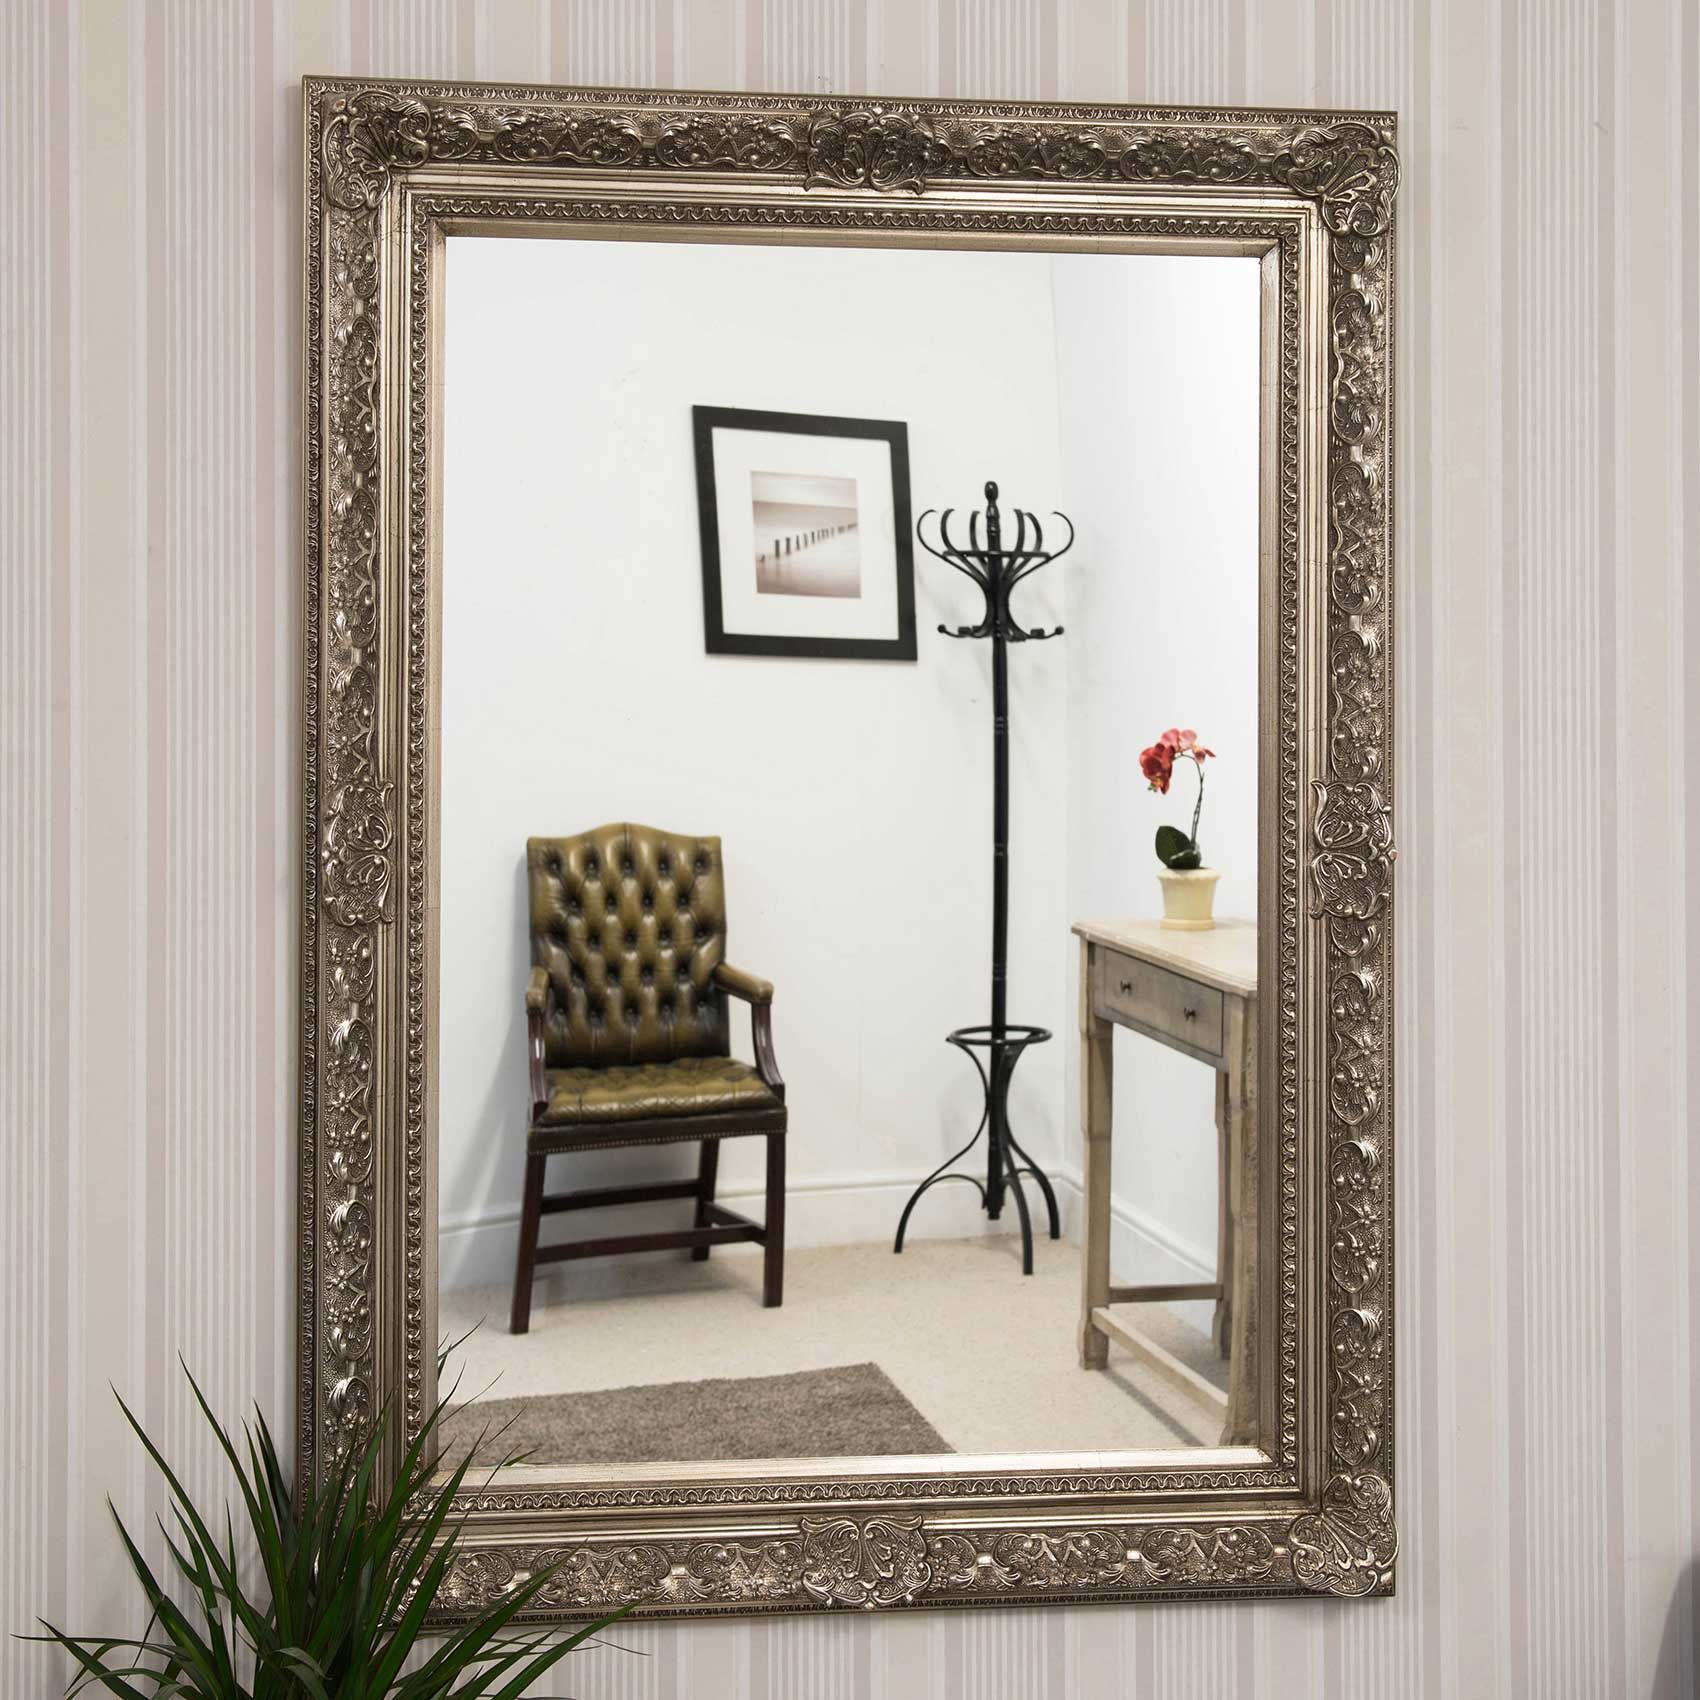 Ornate Silver Big Wall Mirror, How Do You Dispose Of A Big Mirror